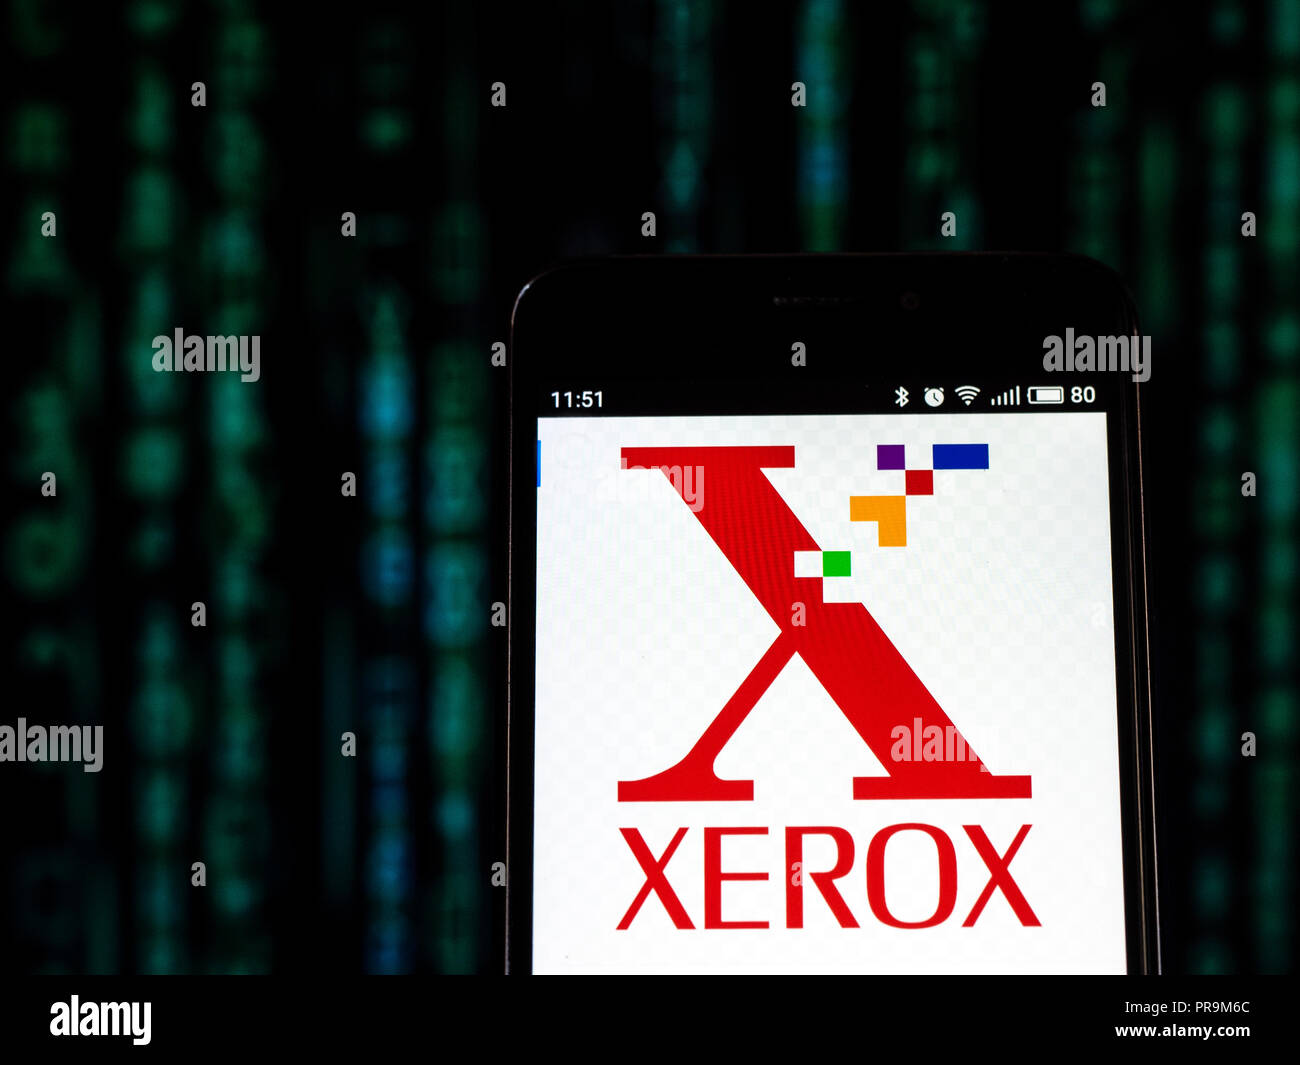 Xerox Corporation logo seen displayed on smart phone. Xerox Corporation is an American global corporation that sells print and digital document solutions, and document technology products in more than 160 countries. Stock Photo